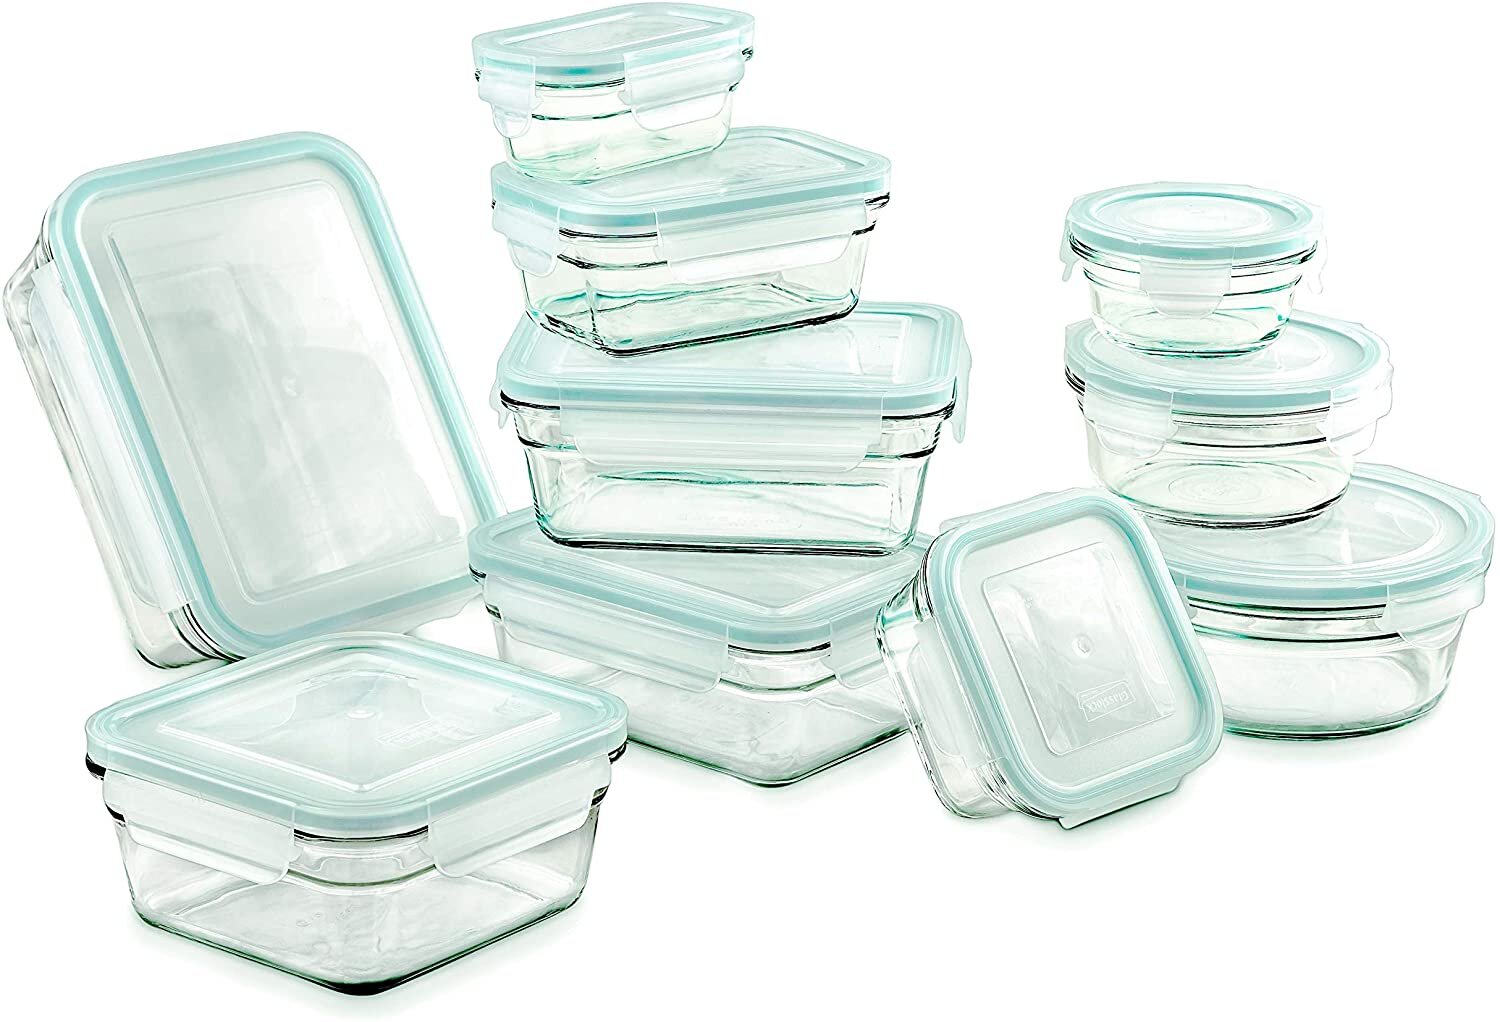 Details about   Glasslock Classic 8 Piece Clear Glass Microwave Safe Food Storage Container Set 